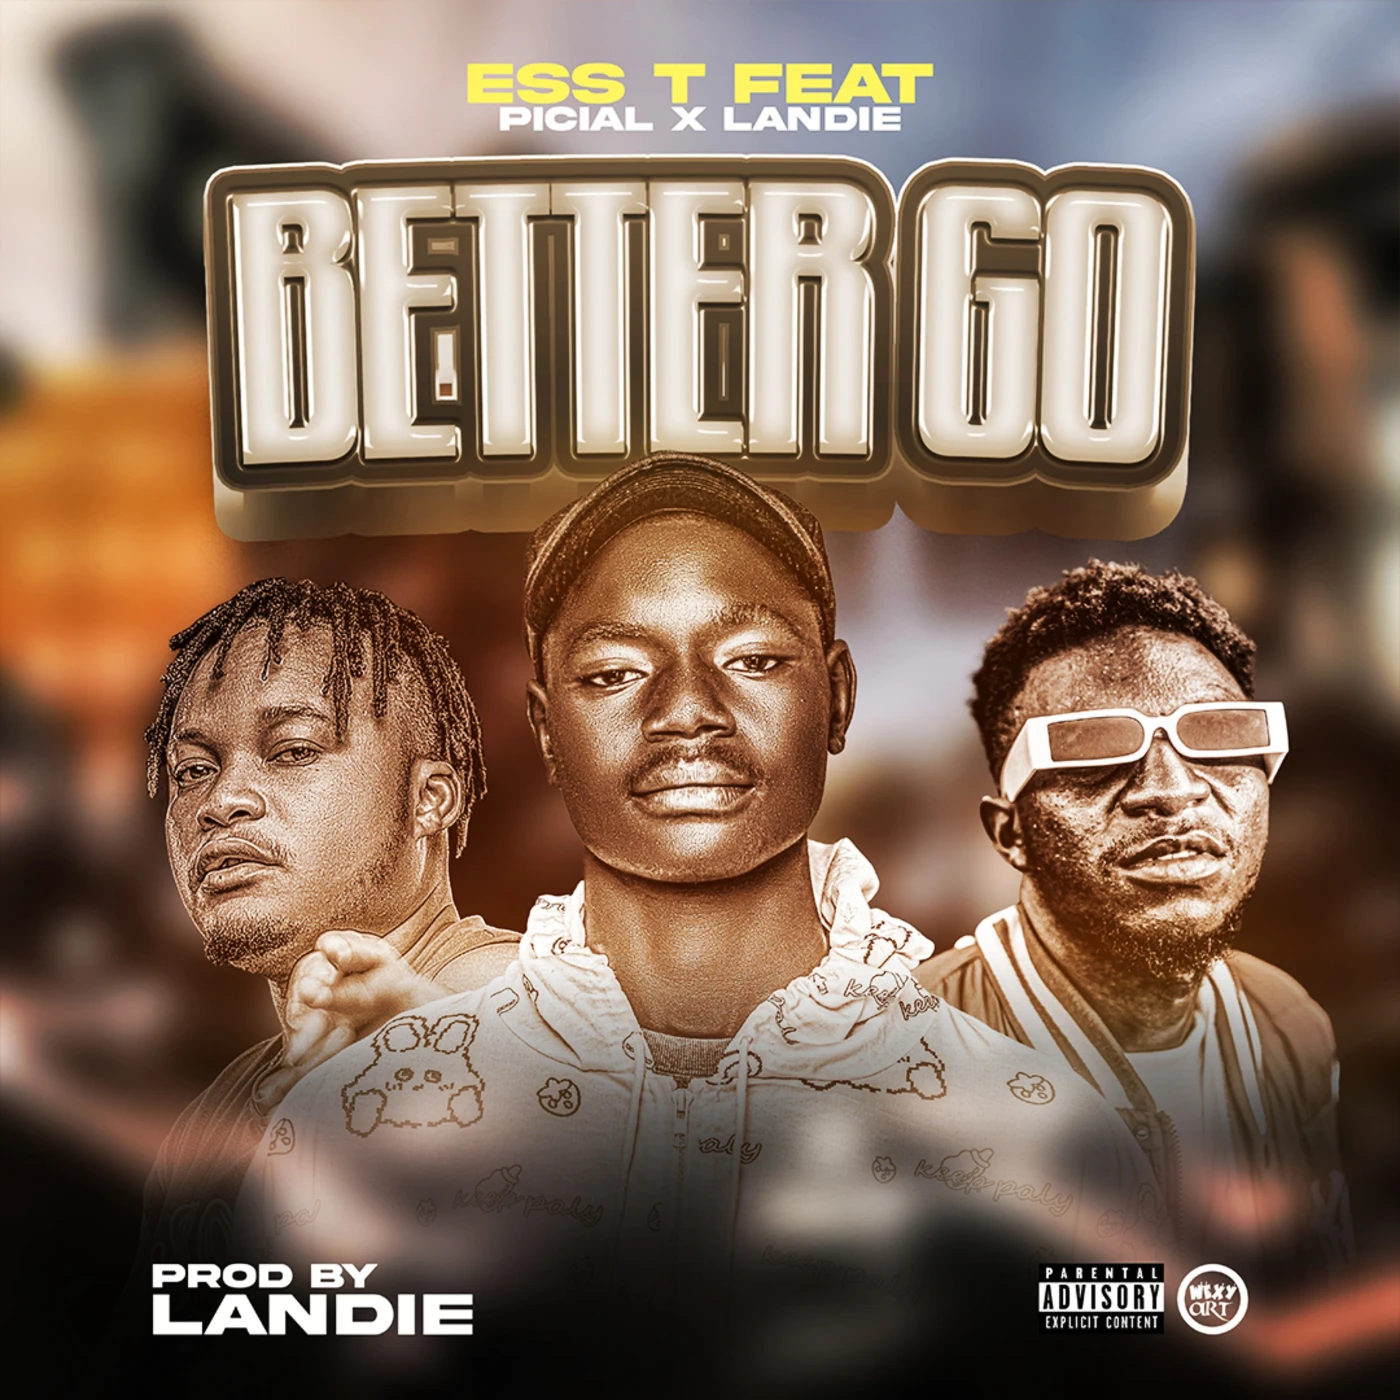 better-go-feat-picial-landie-ess-t-Just Malawi Music